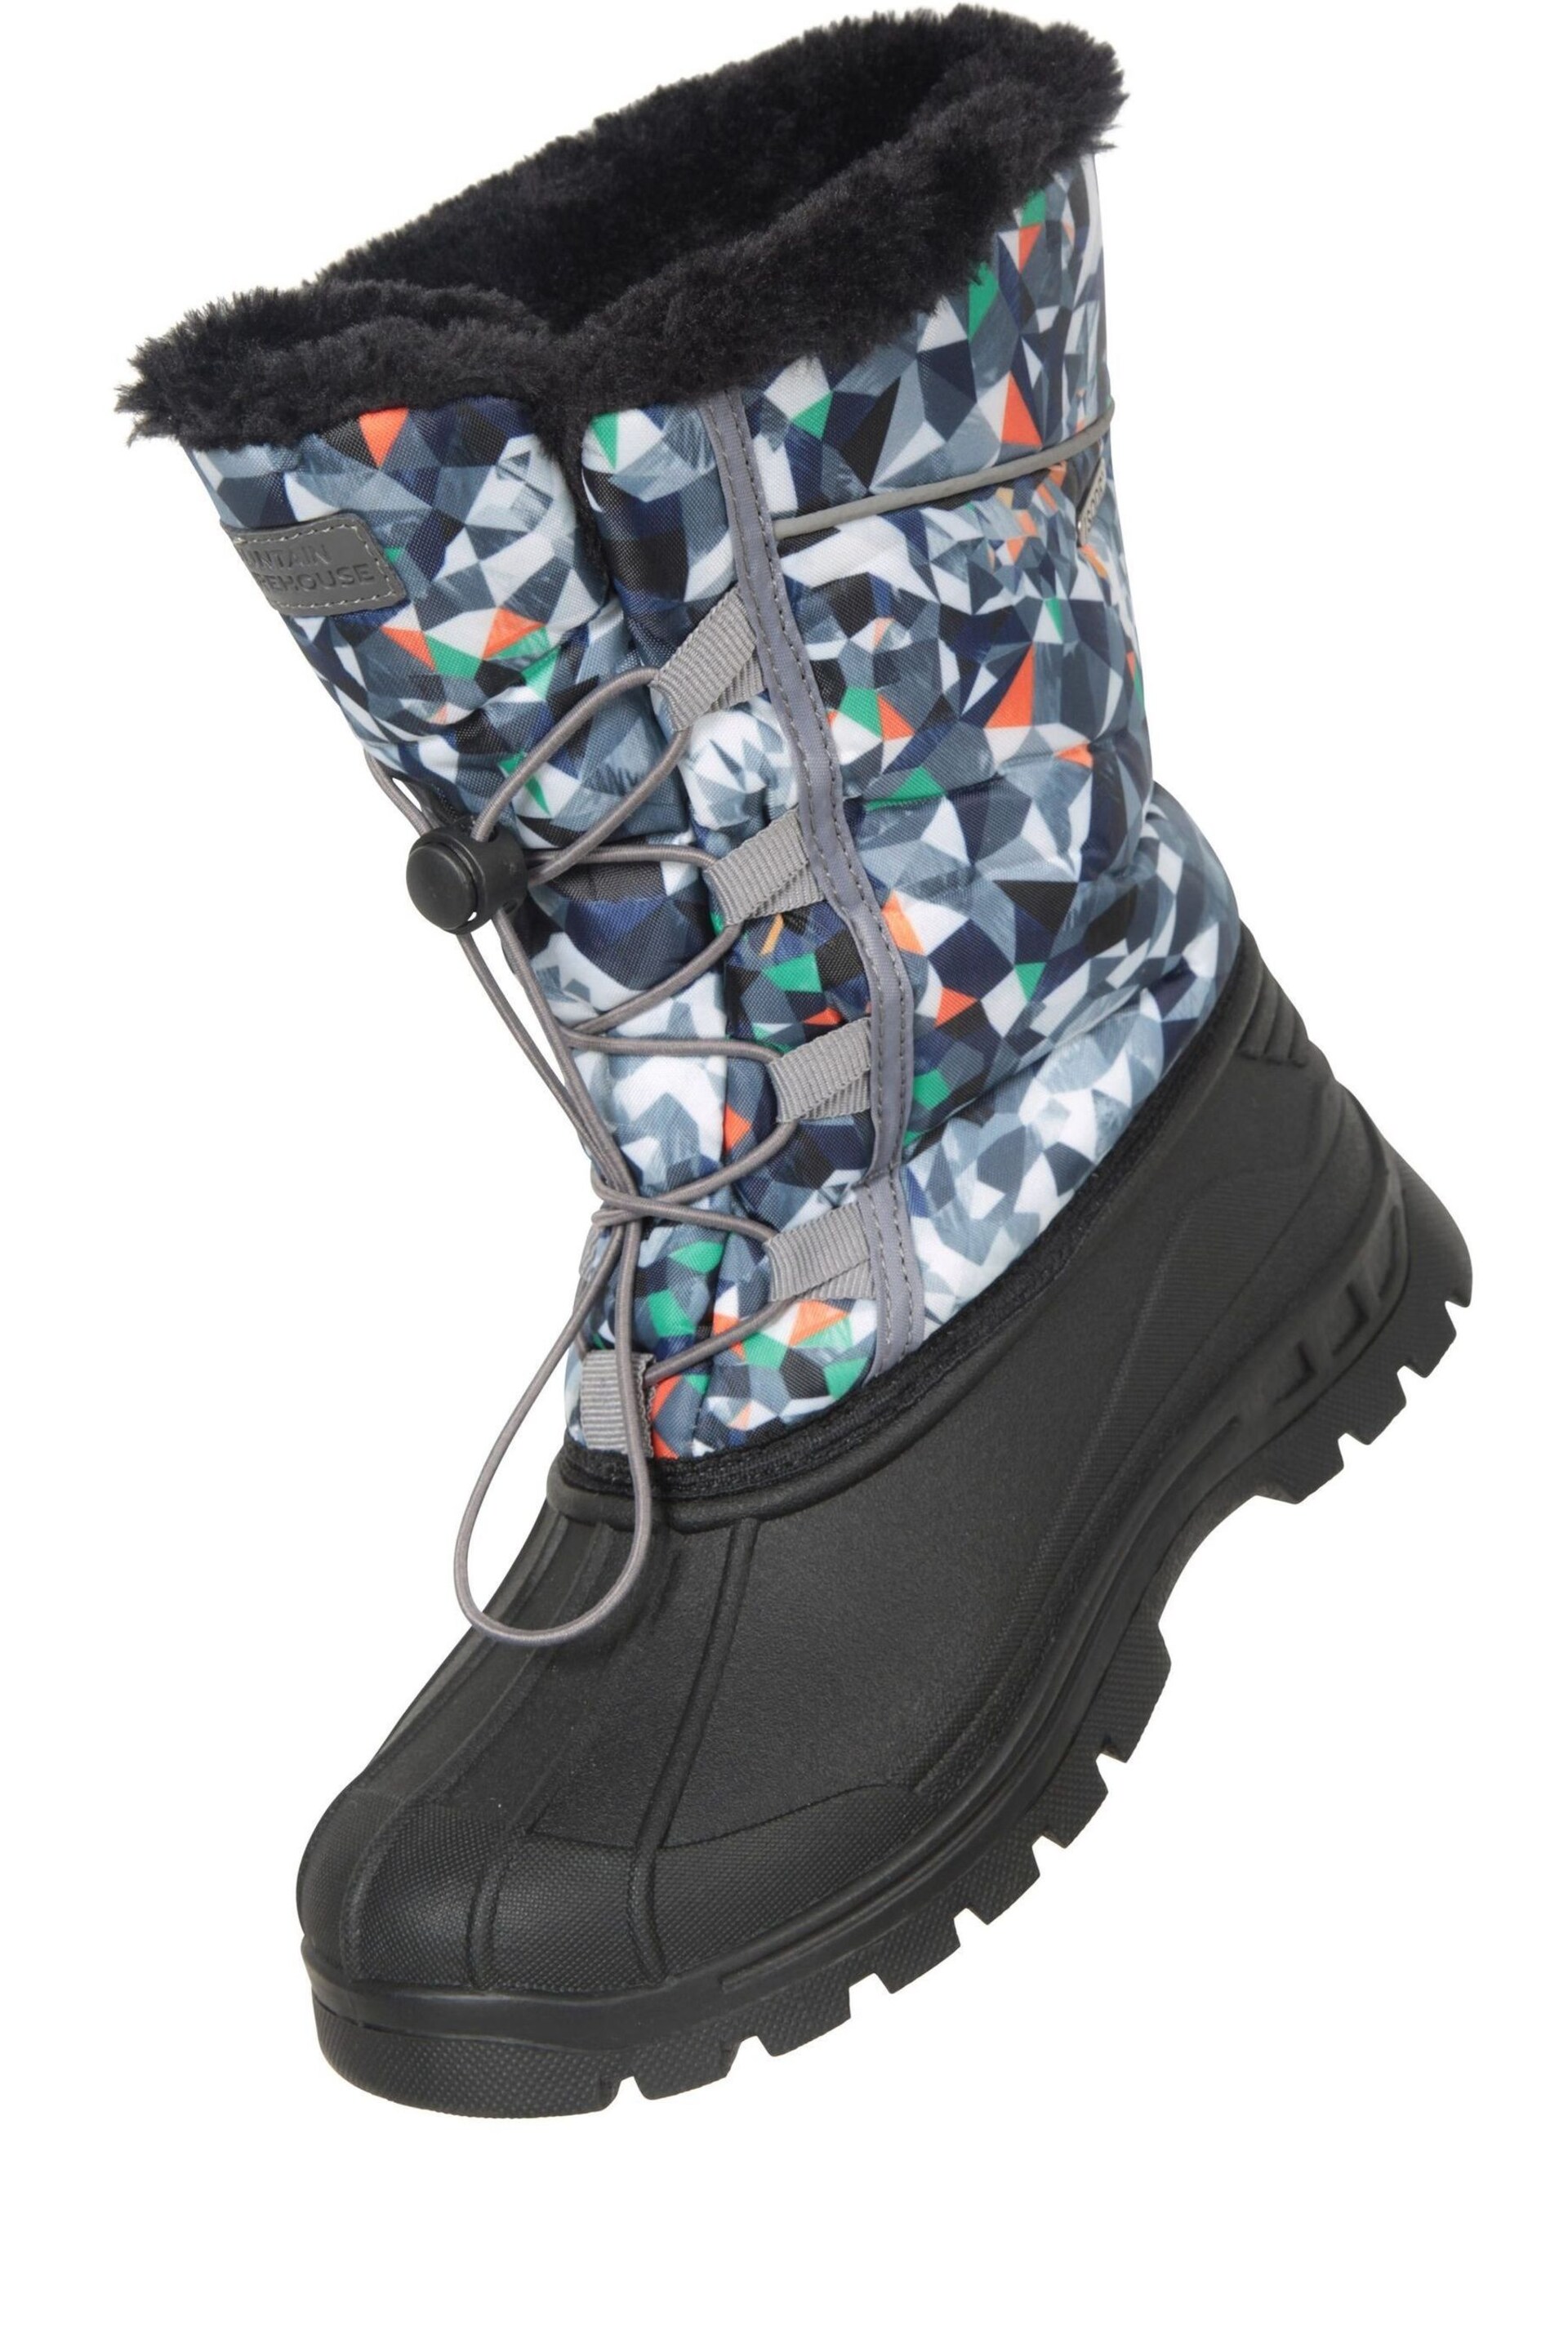 Mountain Warehouse Multi Kids Whistler Sherpa Lined Snow Boots - Image 4 of 6